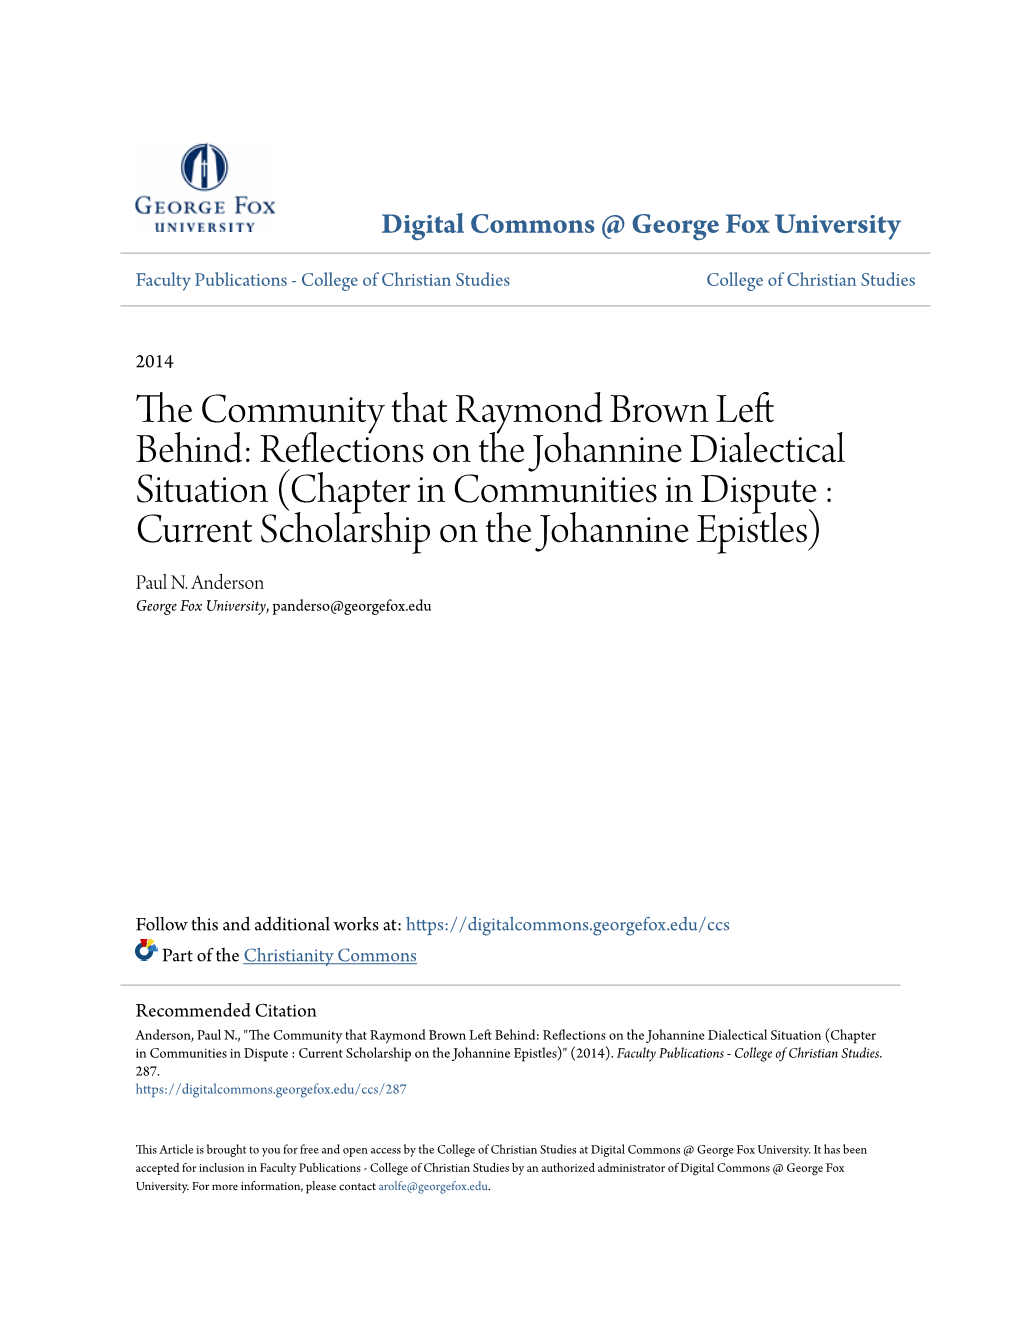 The Community That Raymond Brown Left Behind: Reflections on the Johannine Dialectical Situation1